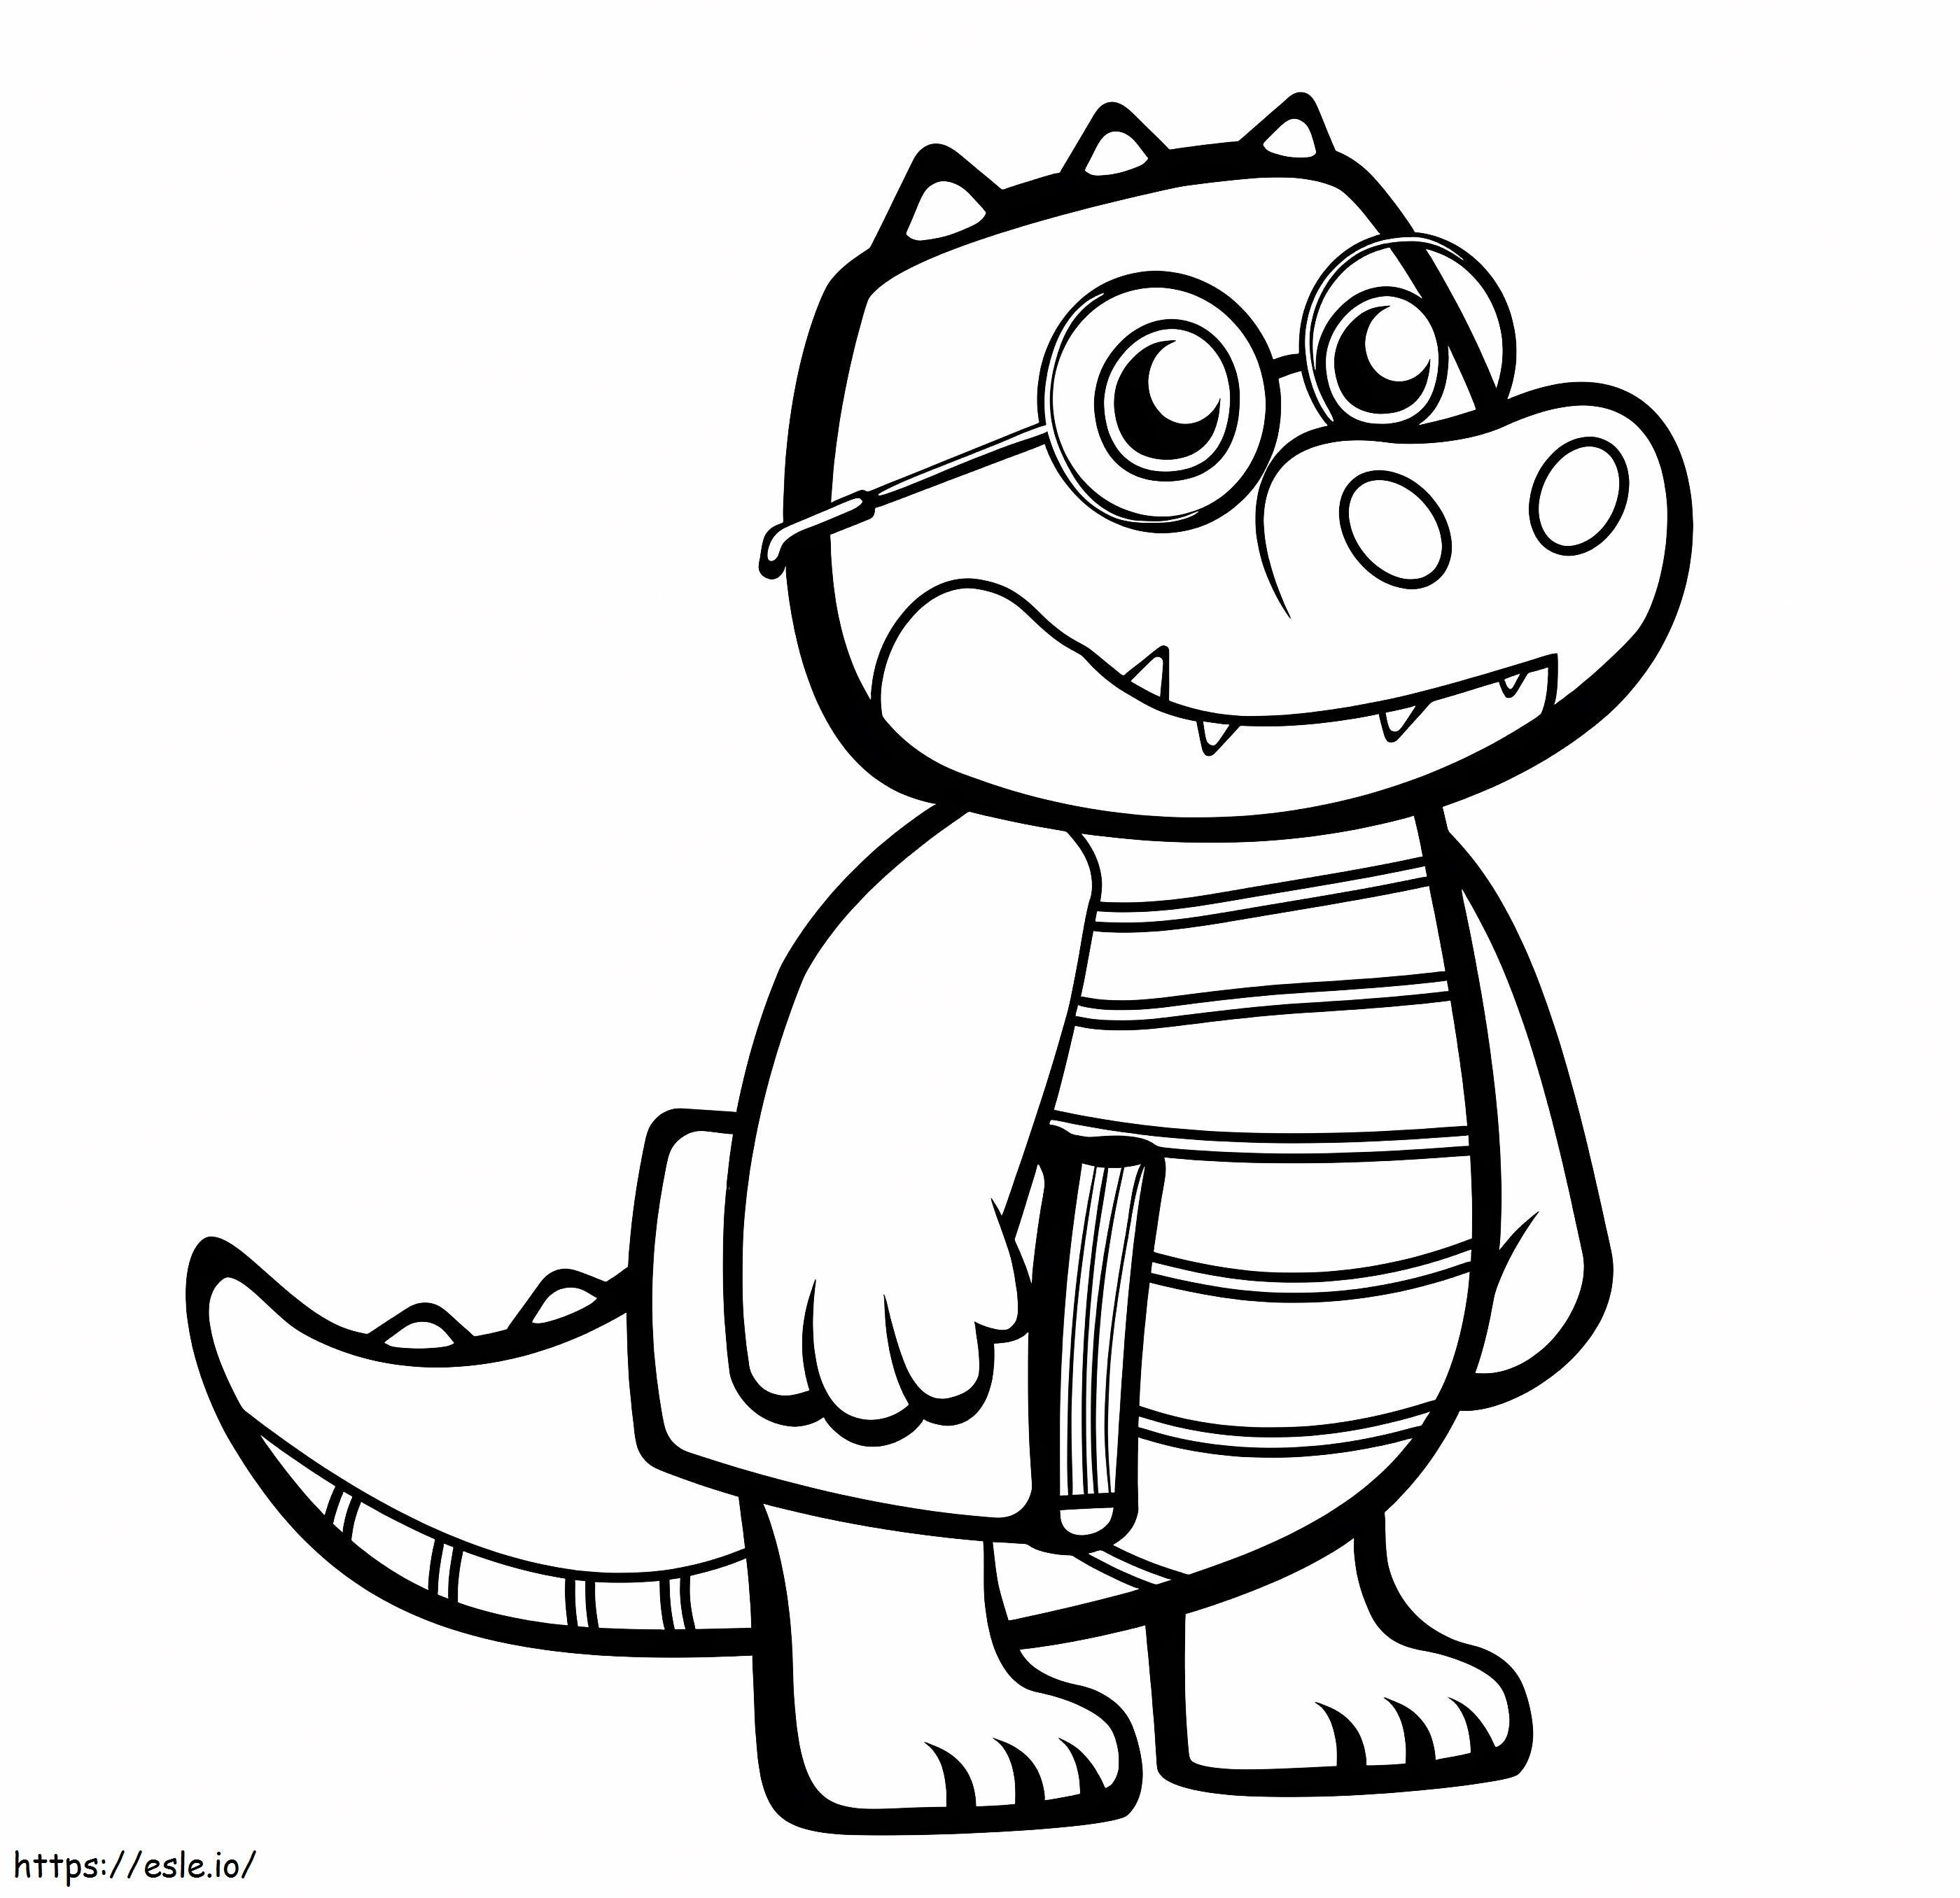 1559786019 Student Crocodile A4 coloring page